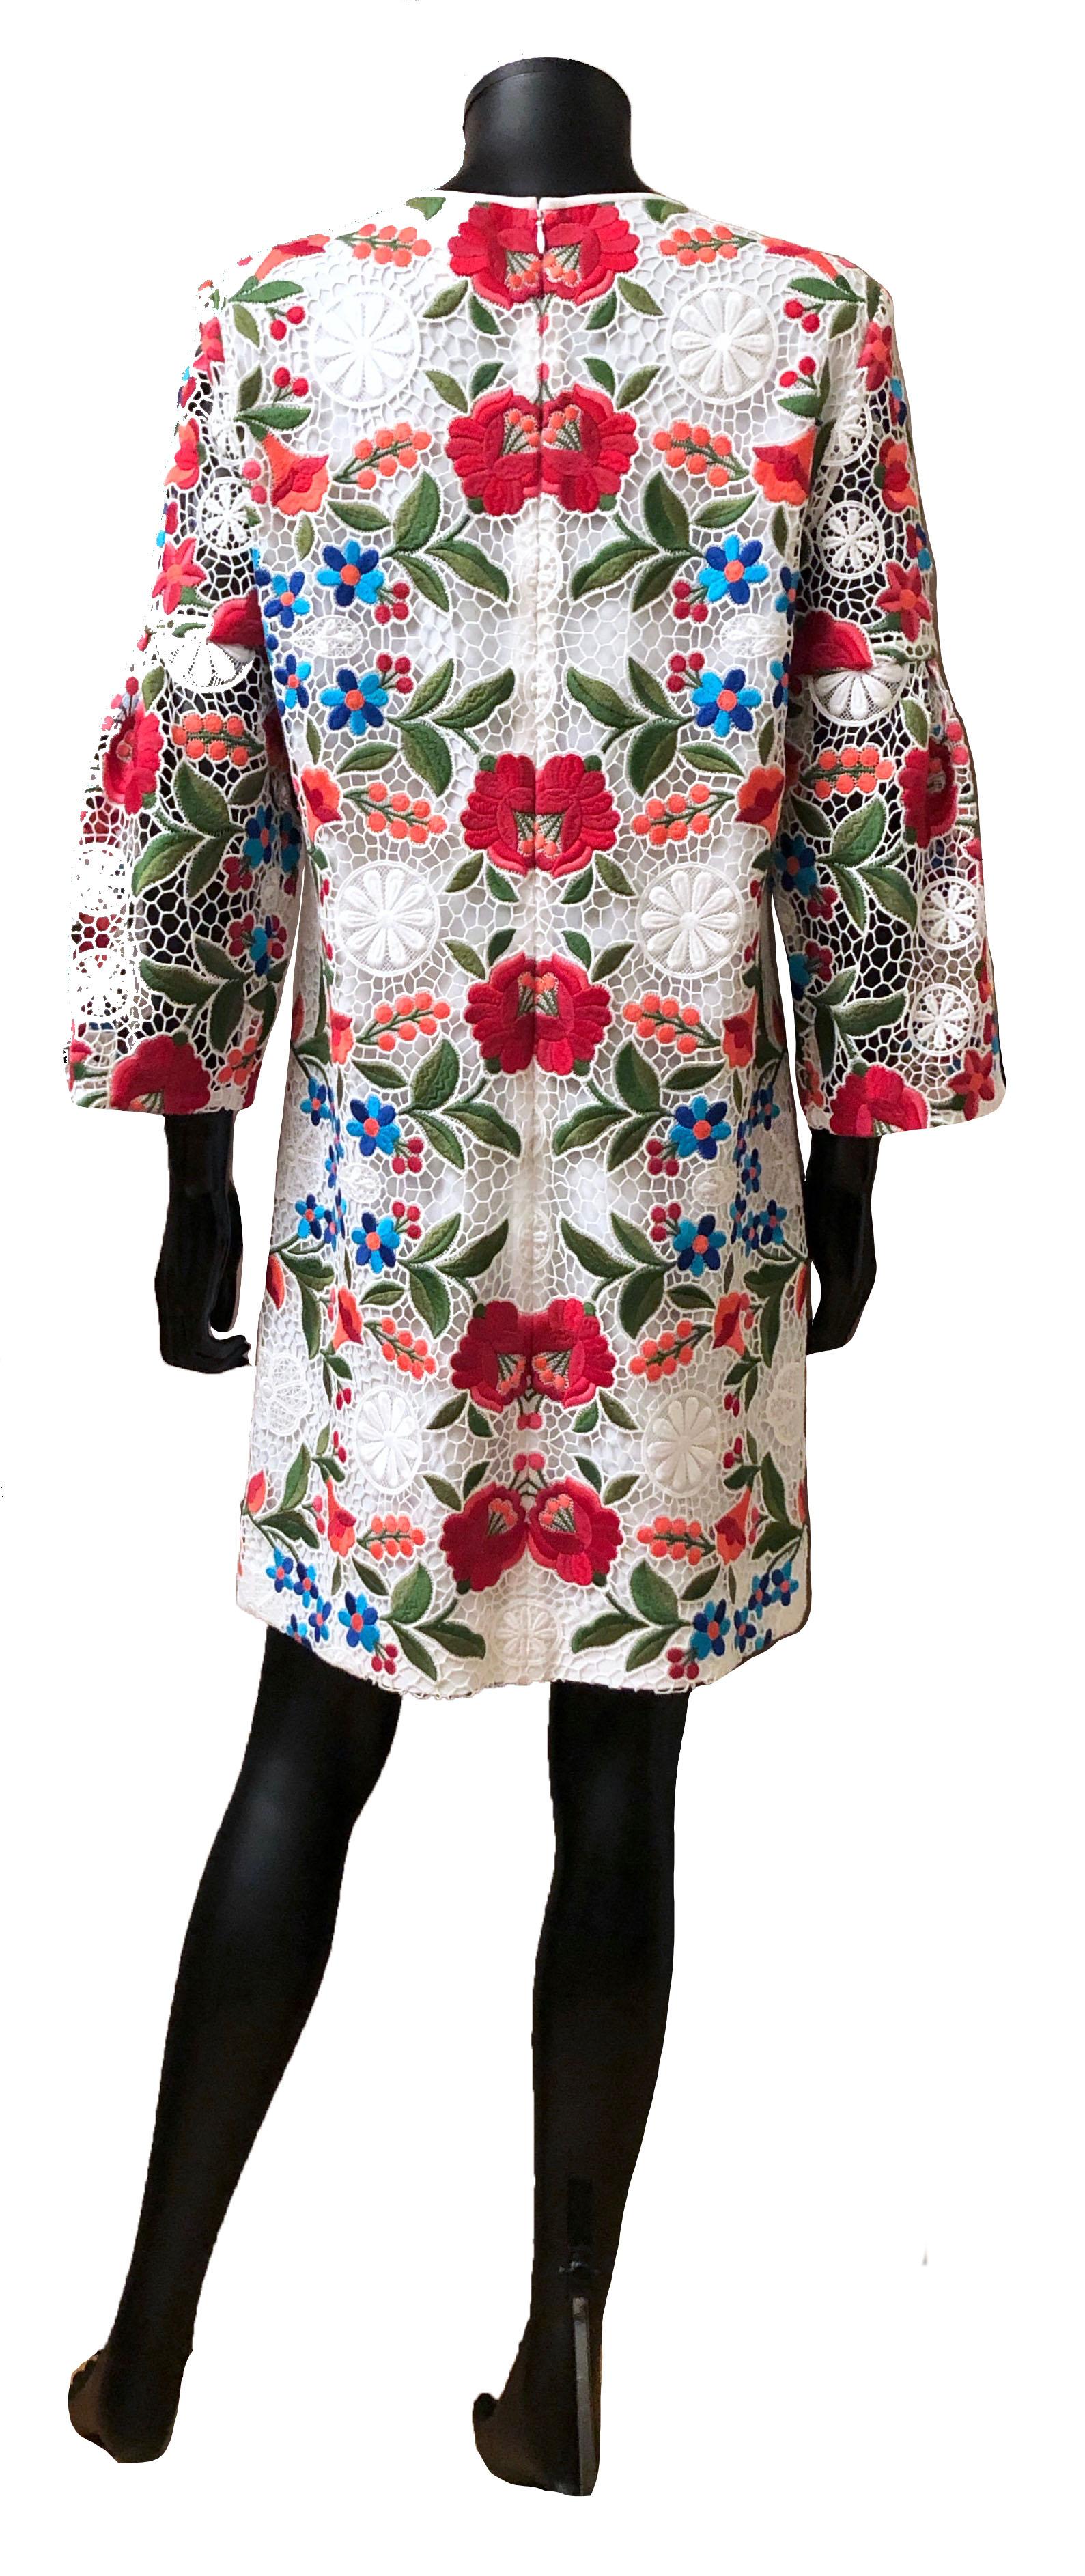 This exquisite multicolor floral embroidered white lace shift dress features a jewel neckline and three-quarter bell sleeves.
It has a hidden back zip.
   
Collection: 2018
Fabric: Outer - 85% cotton, 15% polyester ; Lining - 67% Acetate, 33%